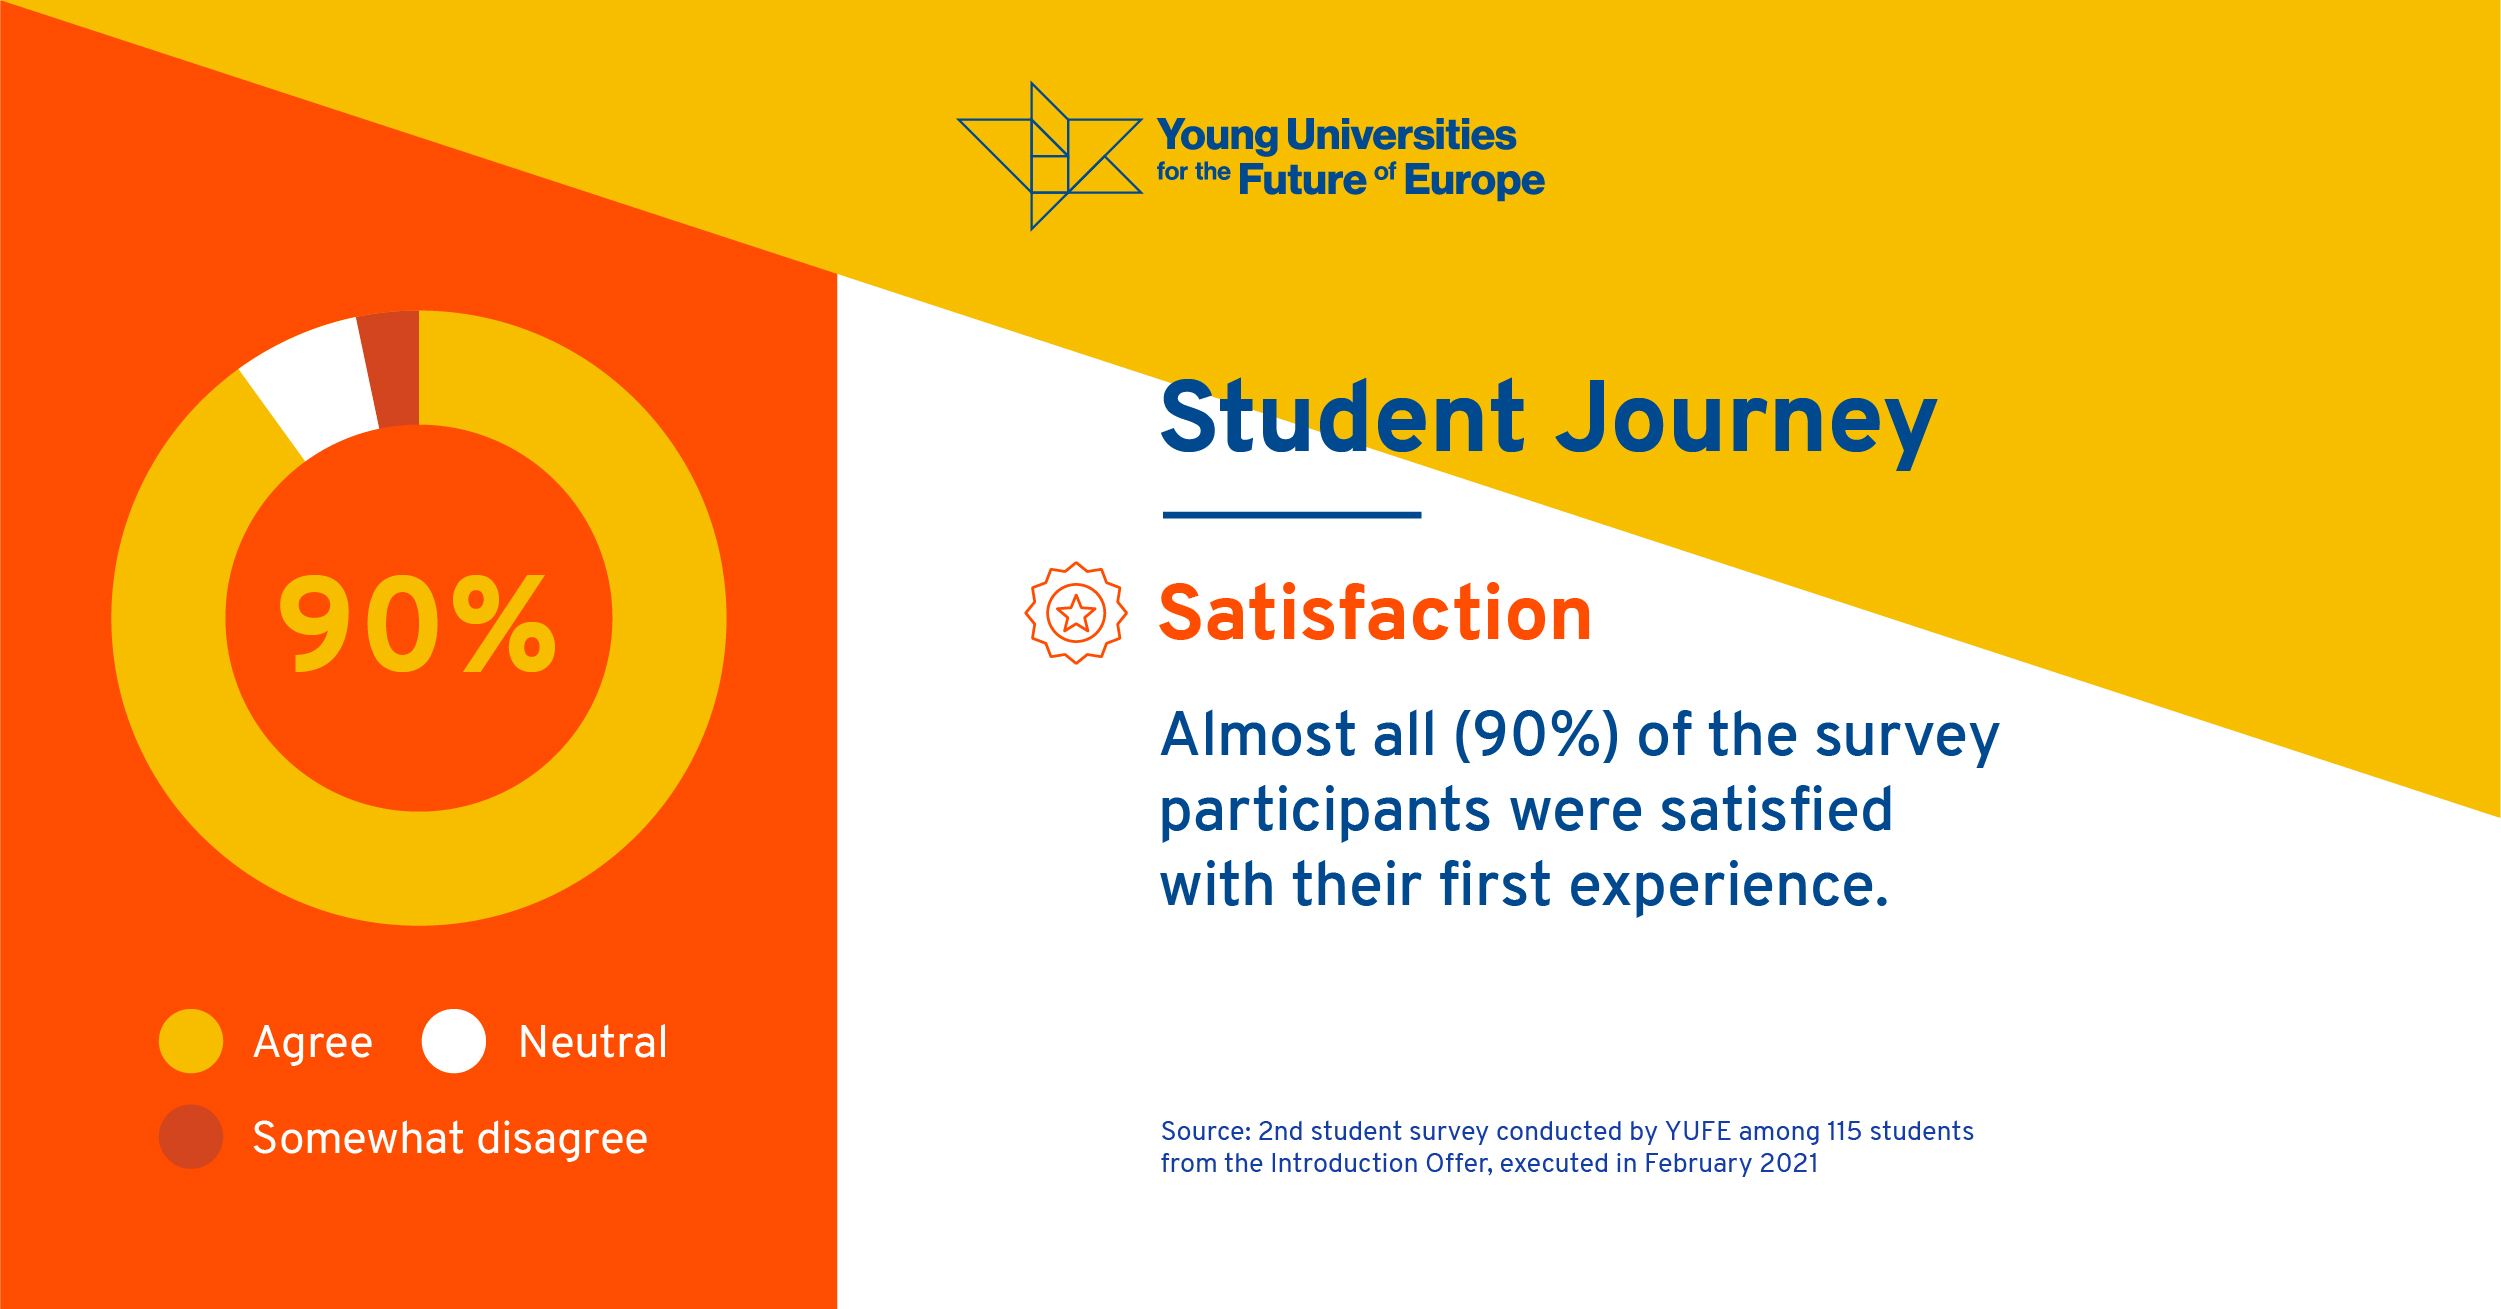 Almost all (90%) of the survey participants were satisfied with their first experience.